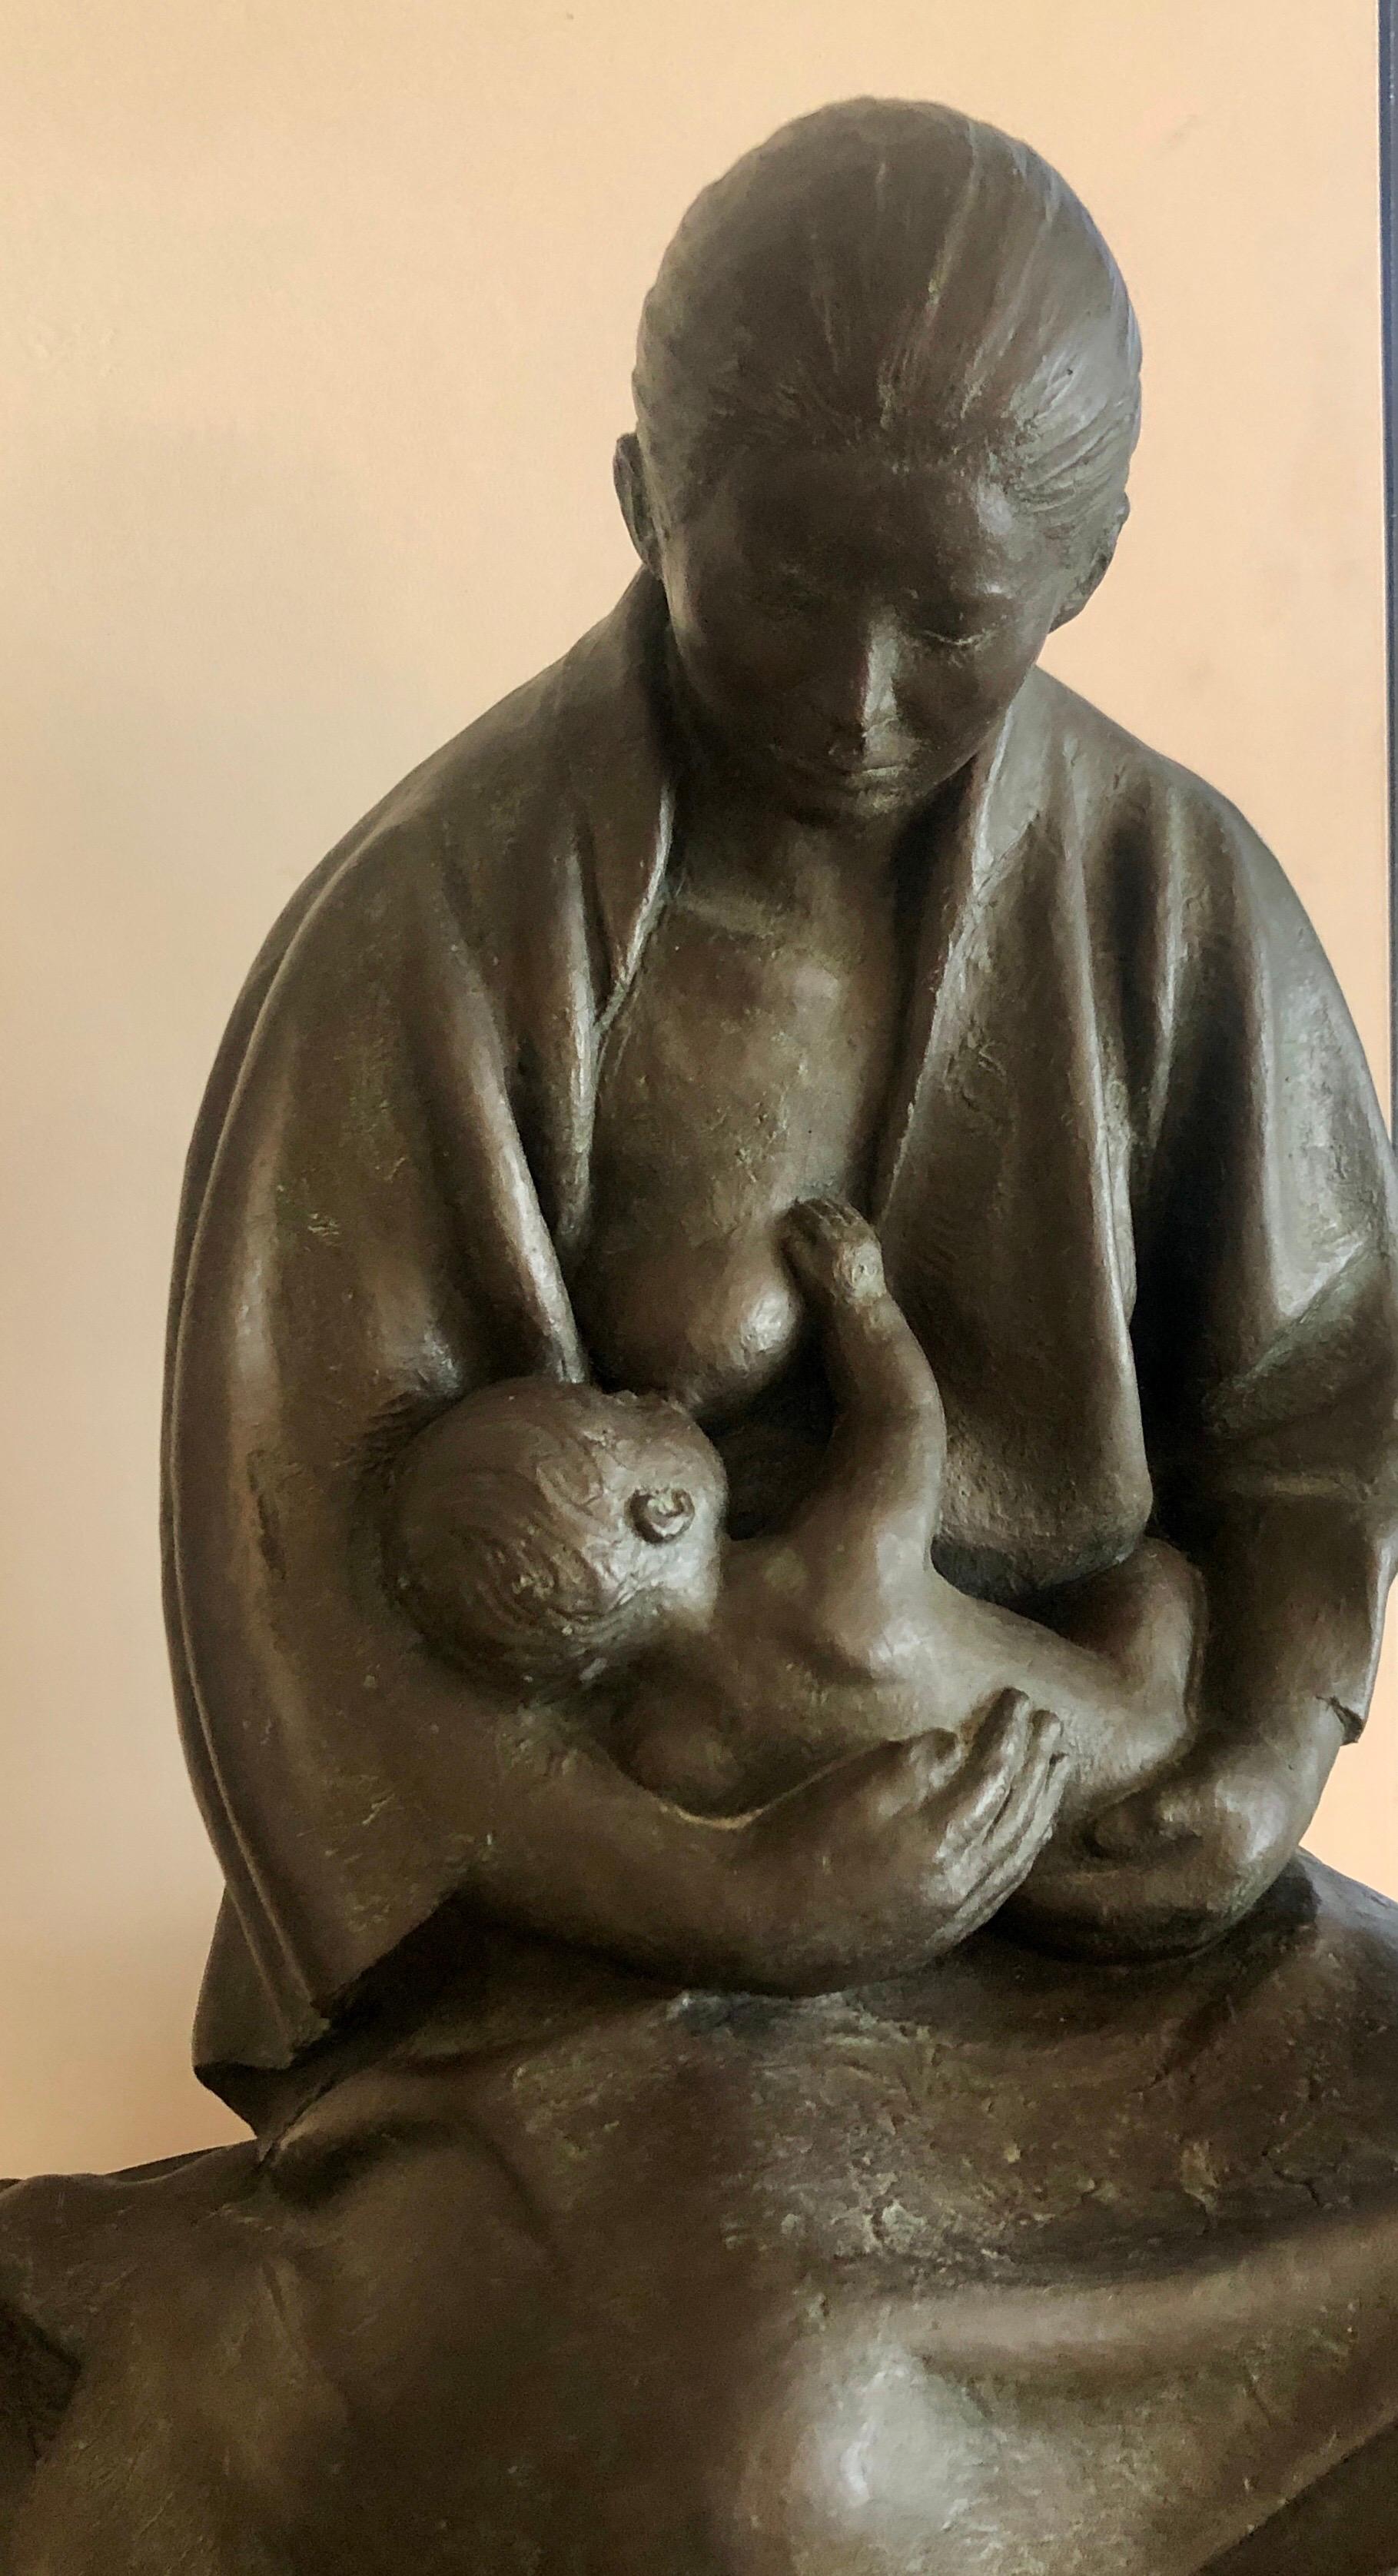 From small limited edition of 7, this is a signed and dated hollow cast bronze sculpture. 

Provenance: Important Miami Beach estate that included many paintings and sculpture by Post Impressionist masterpieces and works by Latin American